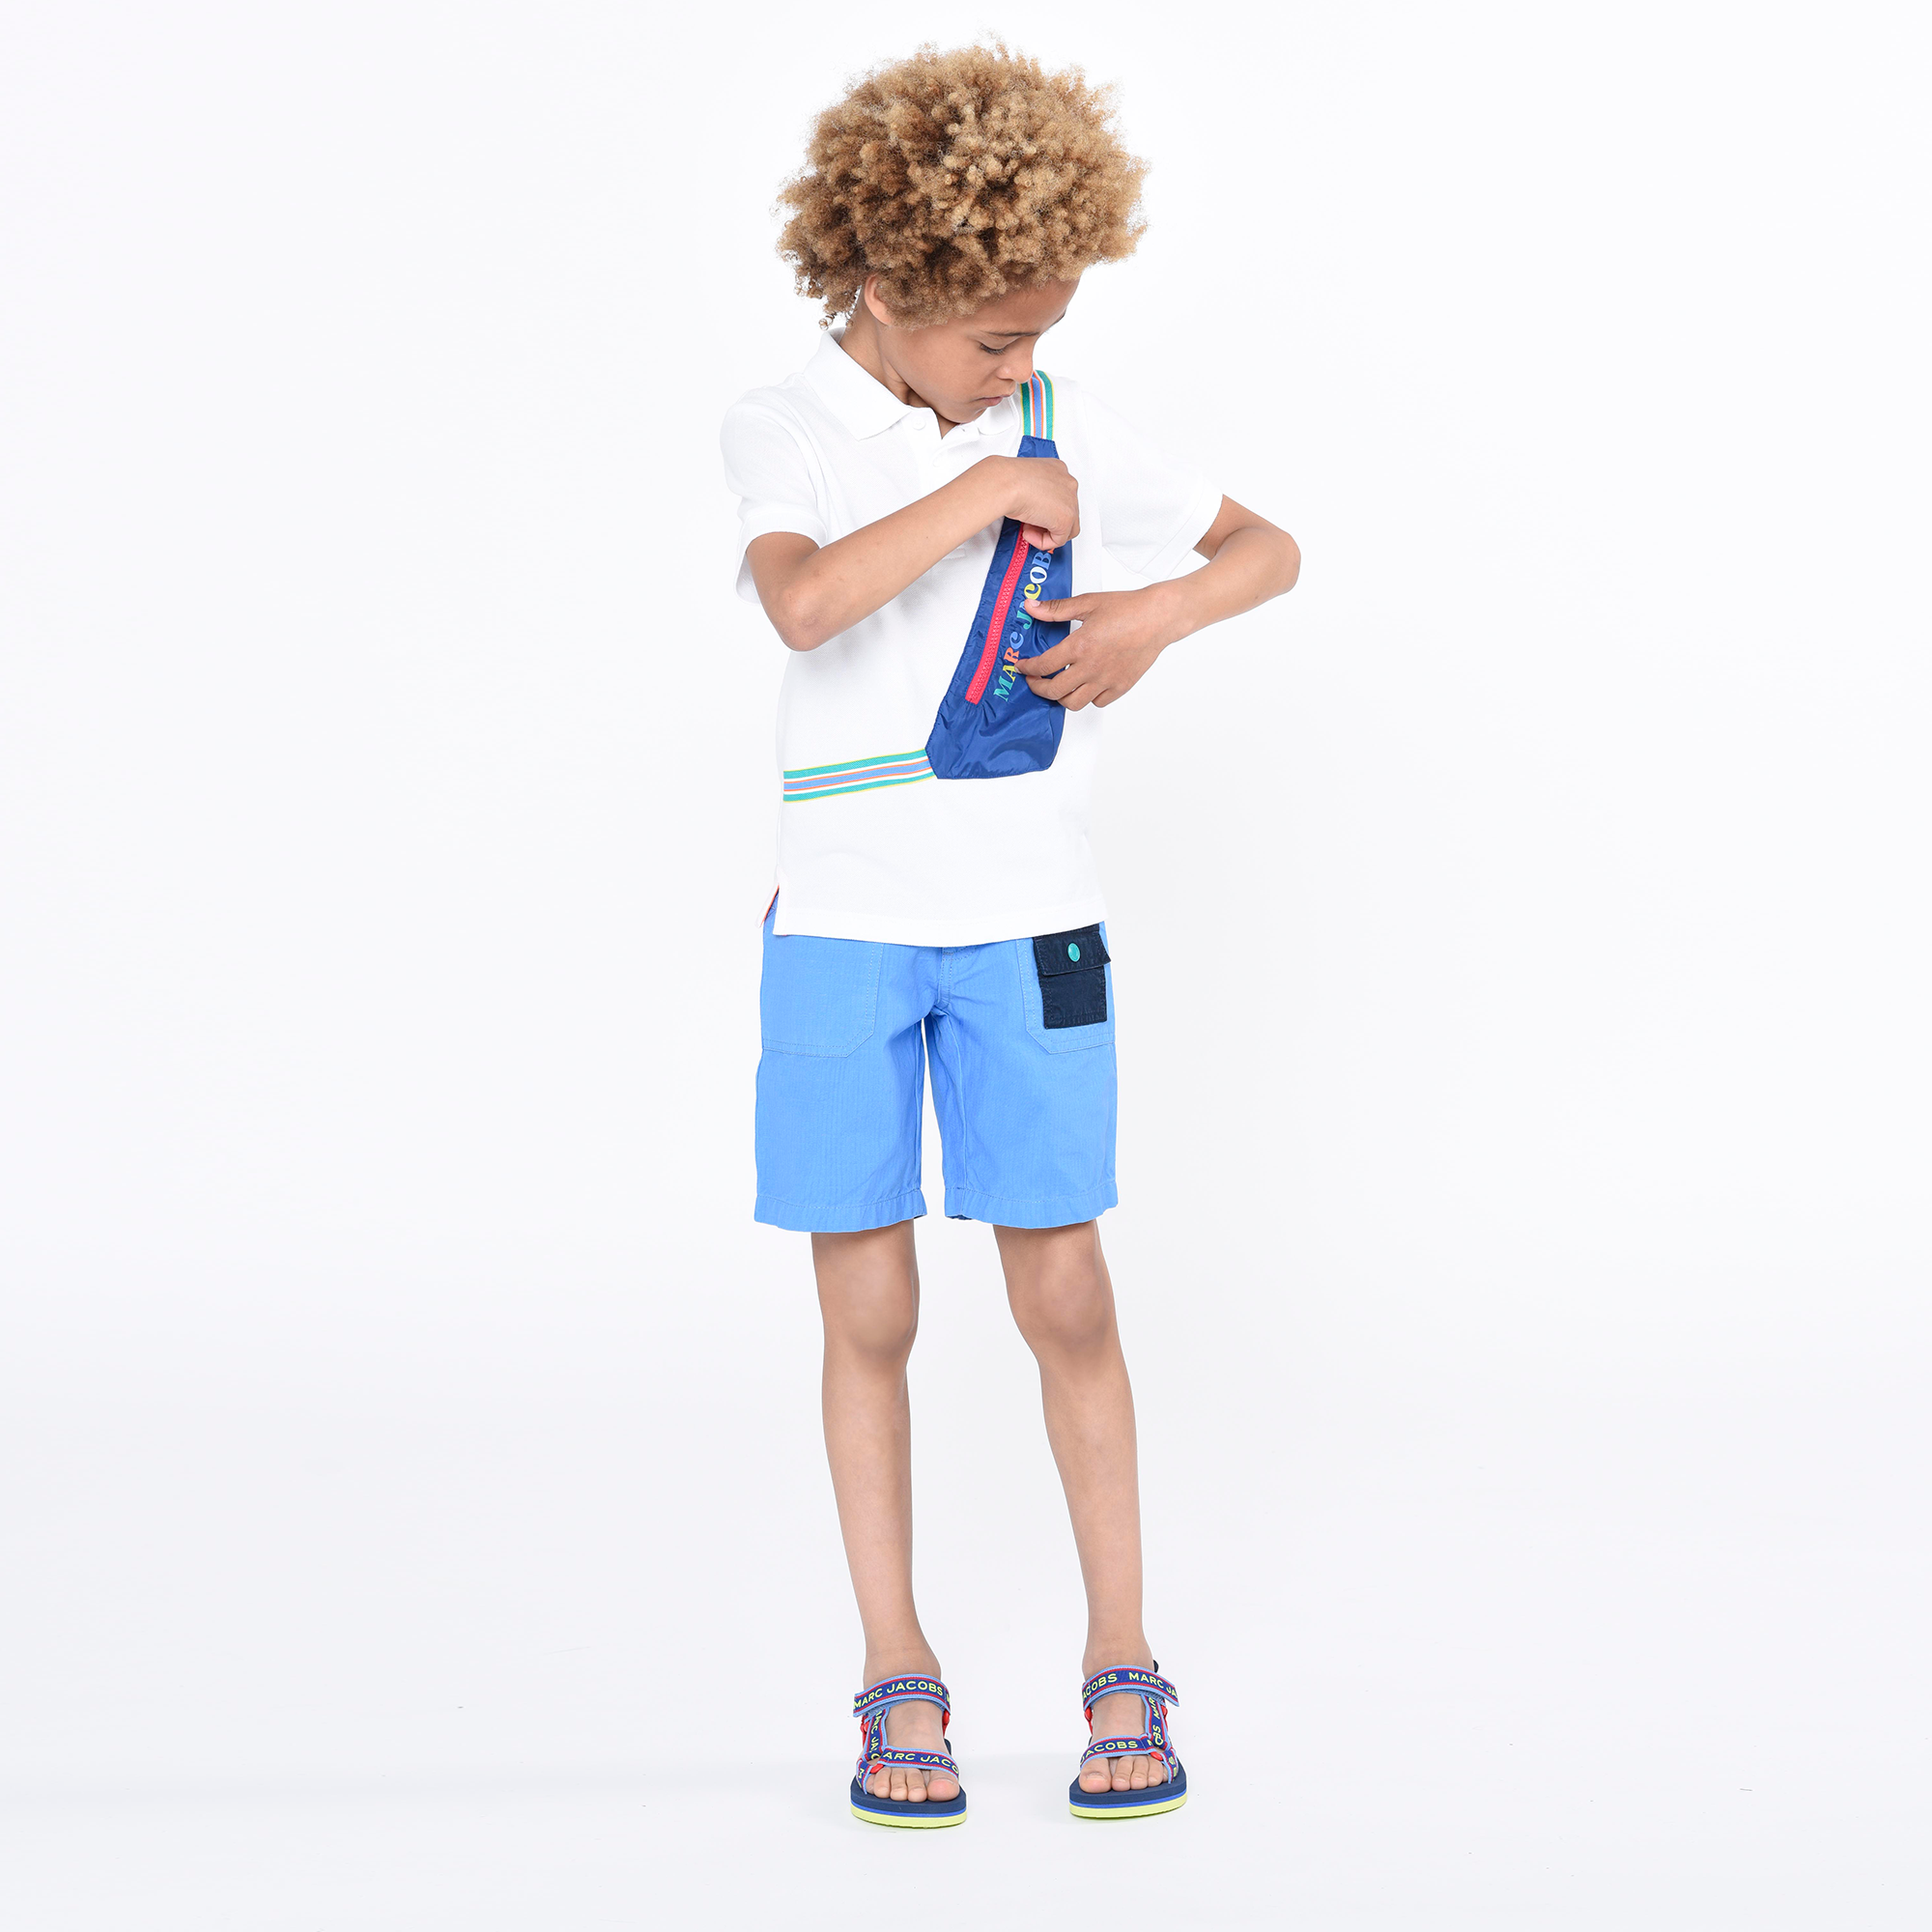 Bermuda shorts with pockets MARC JACOBS for BOY